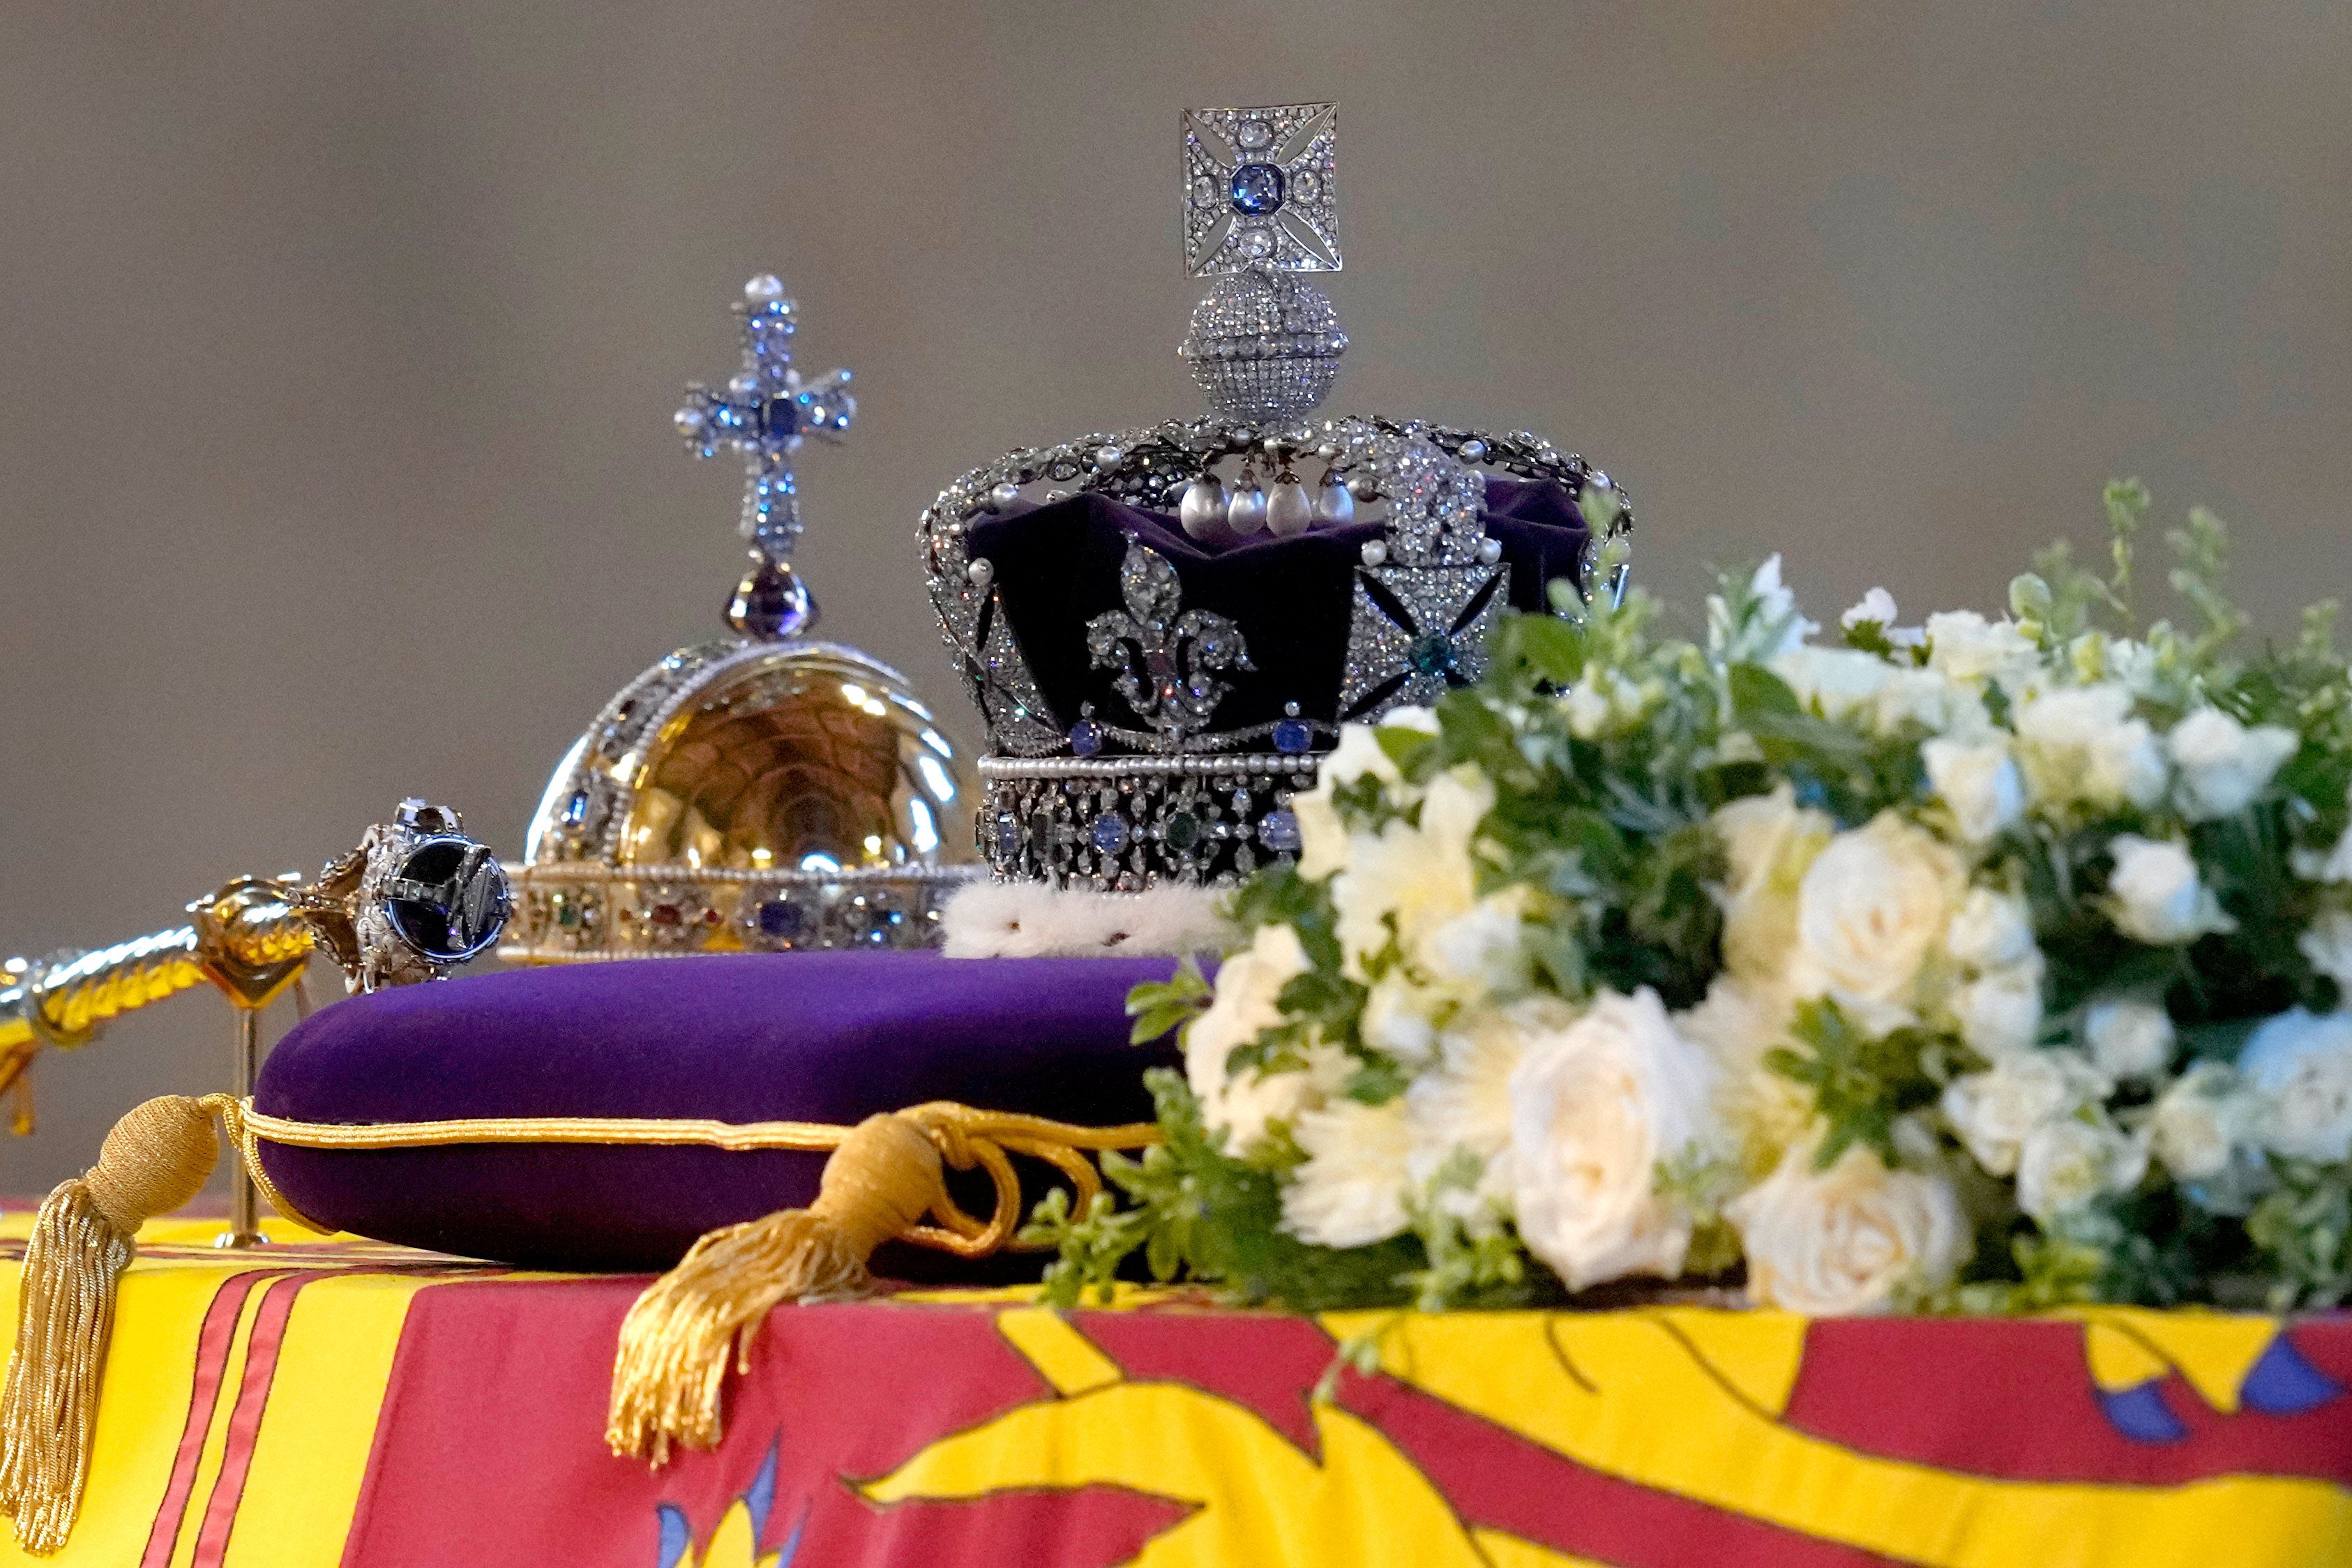 Lying-in-State Of Her Majesty Queen Elizabeth II At Westminster Hall